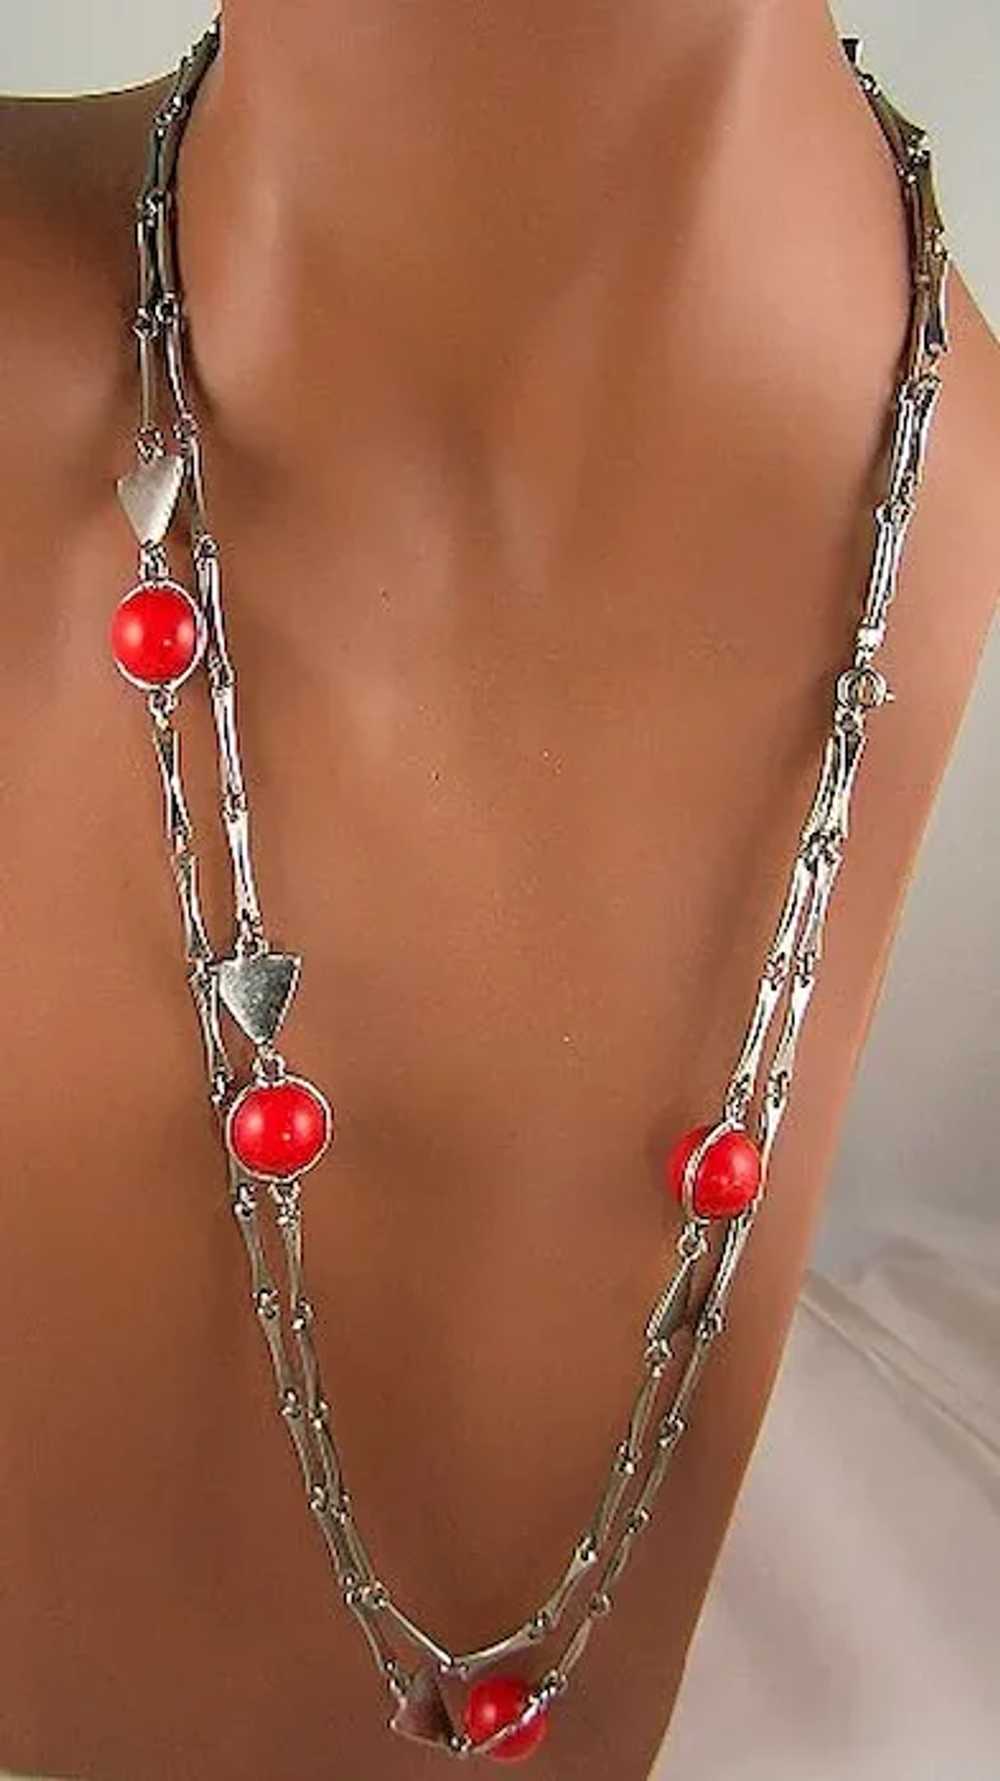 Mod Geometric Red Ball & Triangle Necklace - image 2